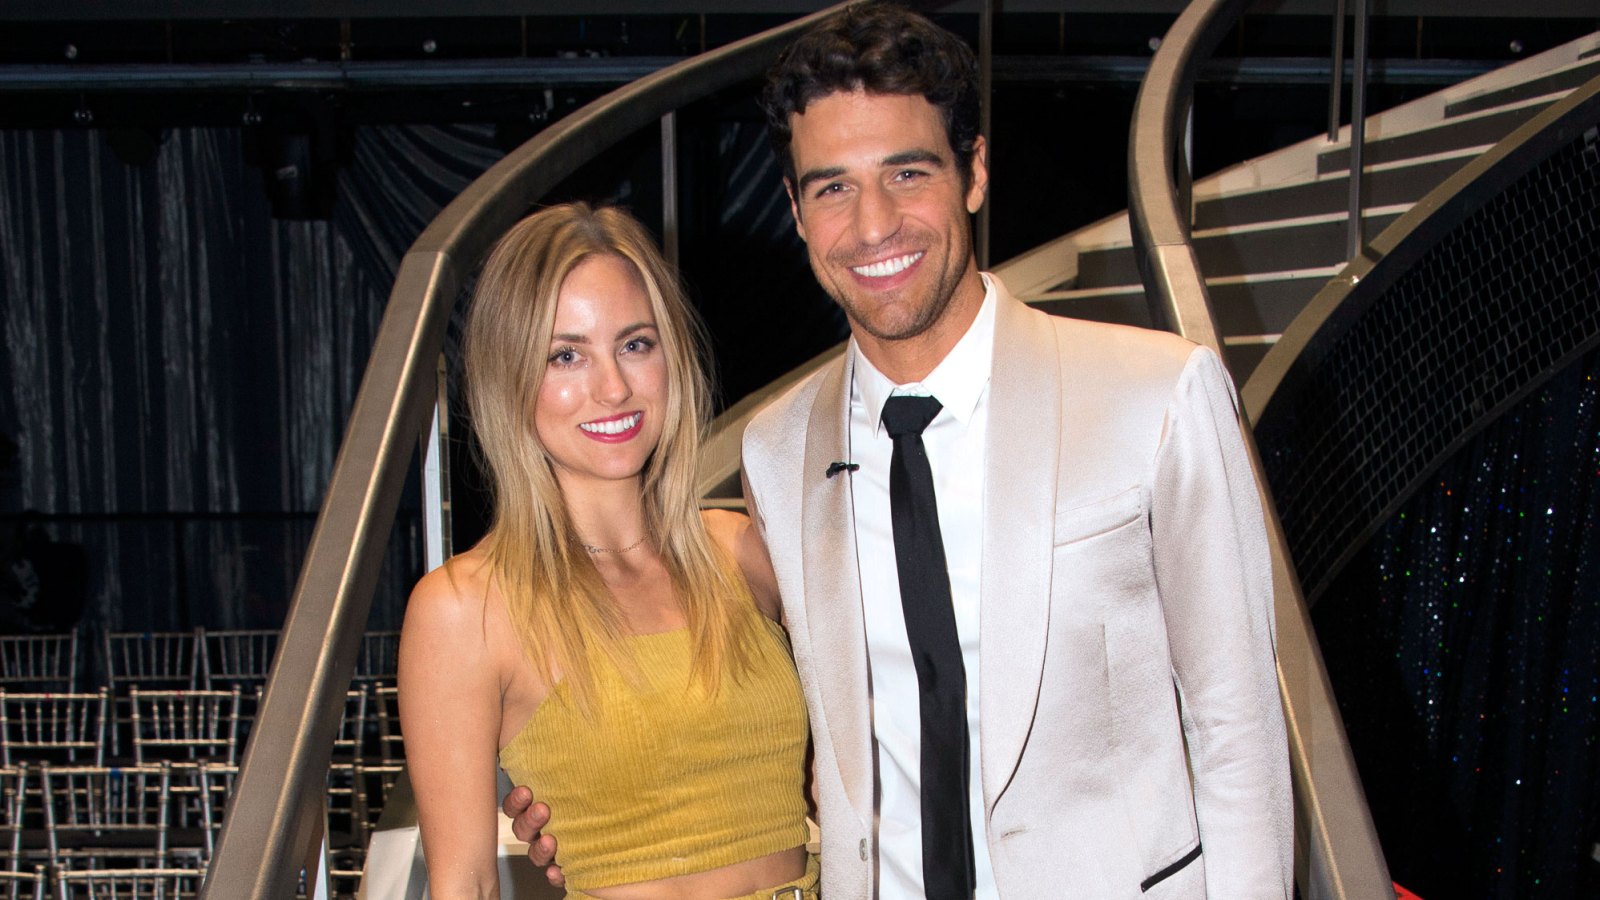 Bachelor in Paradise's Kendall Long and Joe Amabile Are Officially Moving in Together